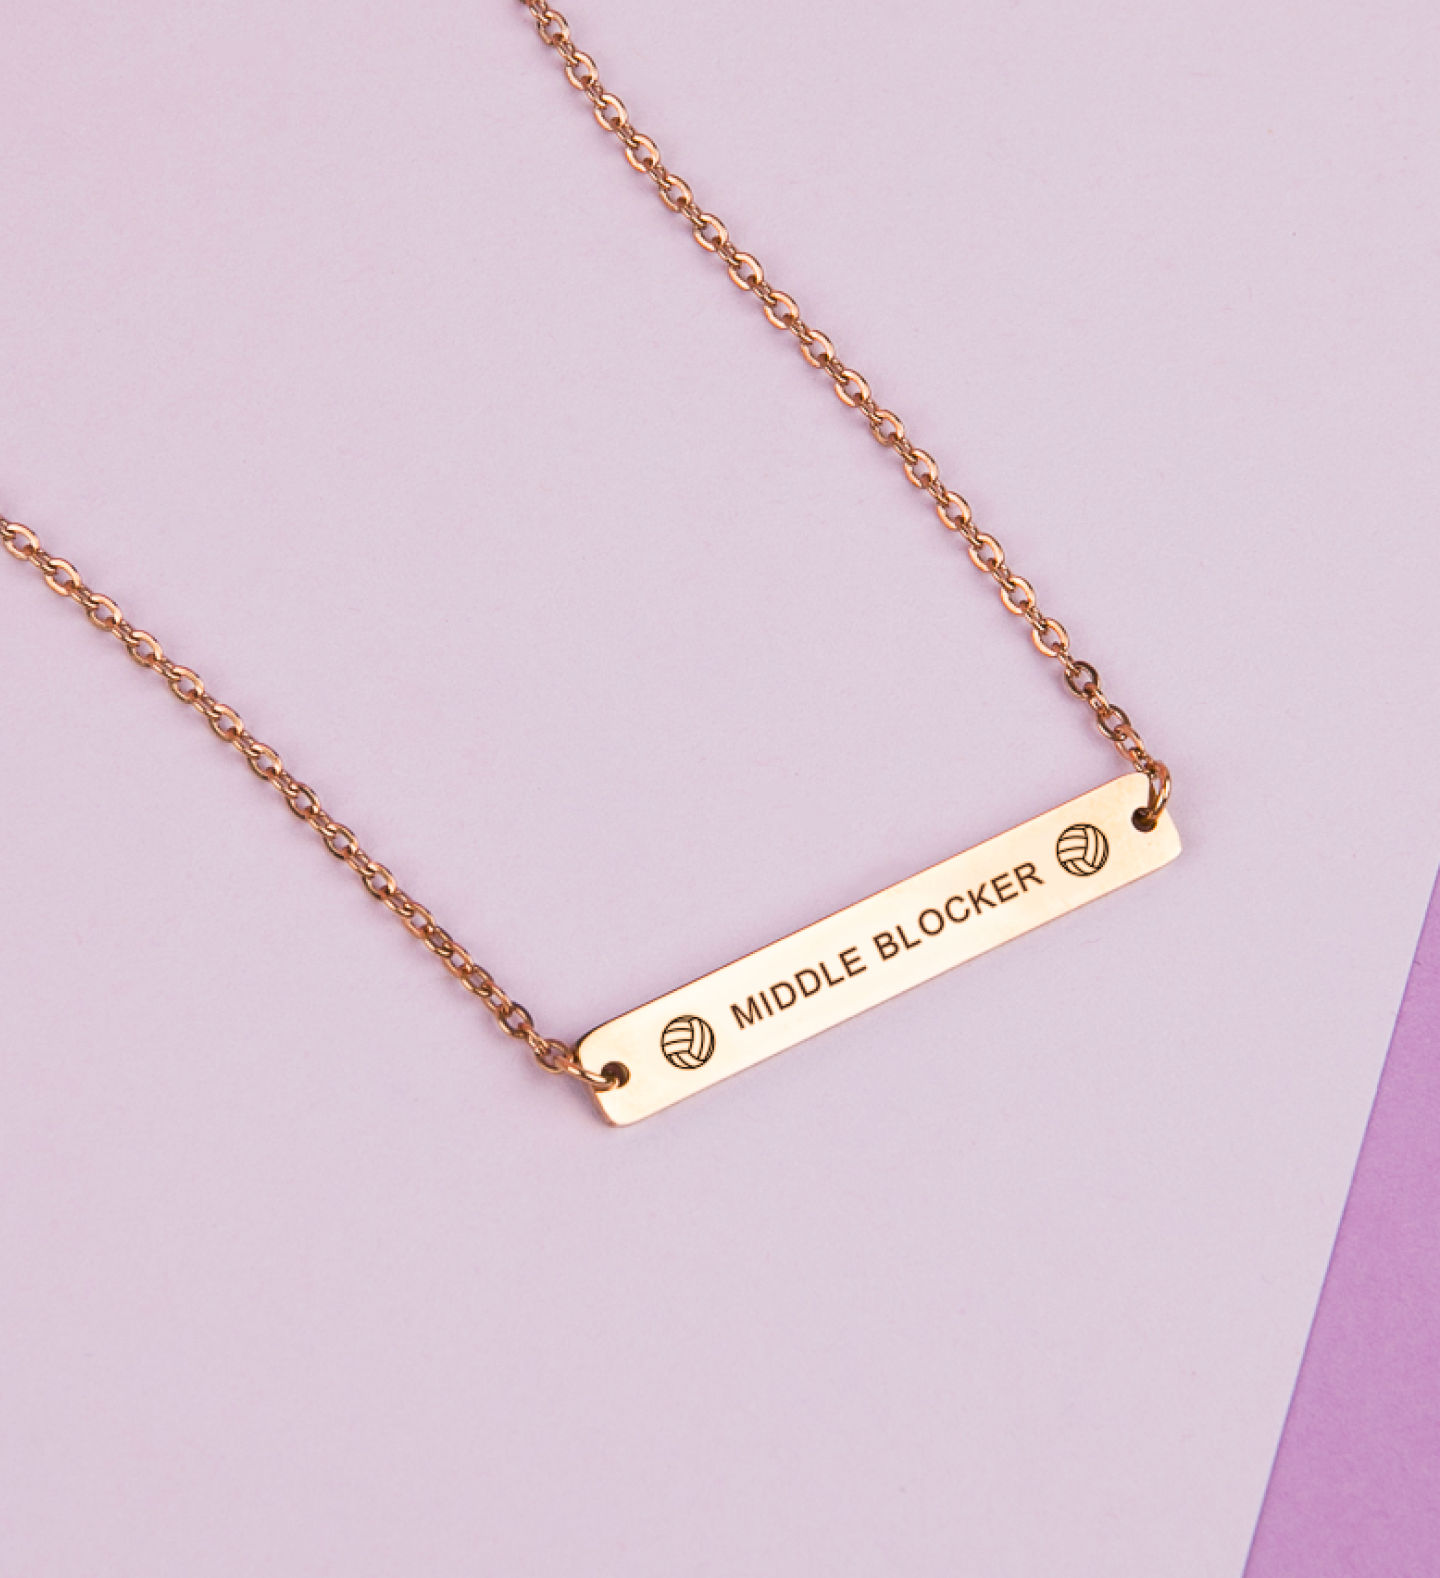 Middle Blocker - Volleyball Position Engraved Necklace Bar